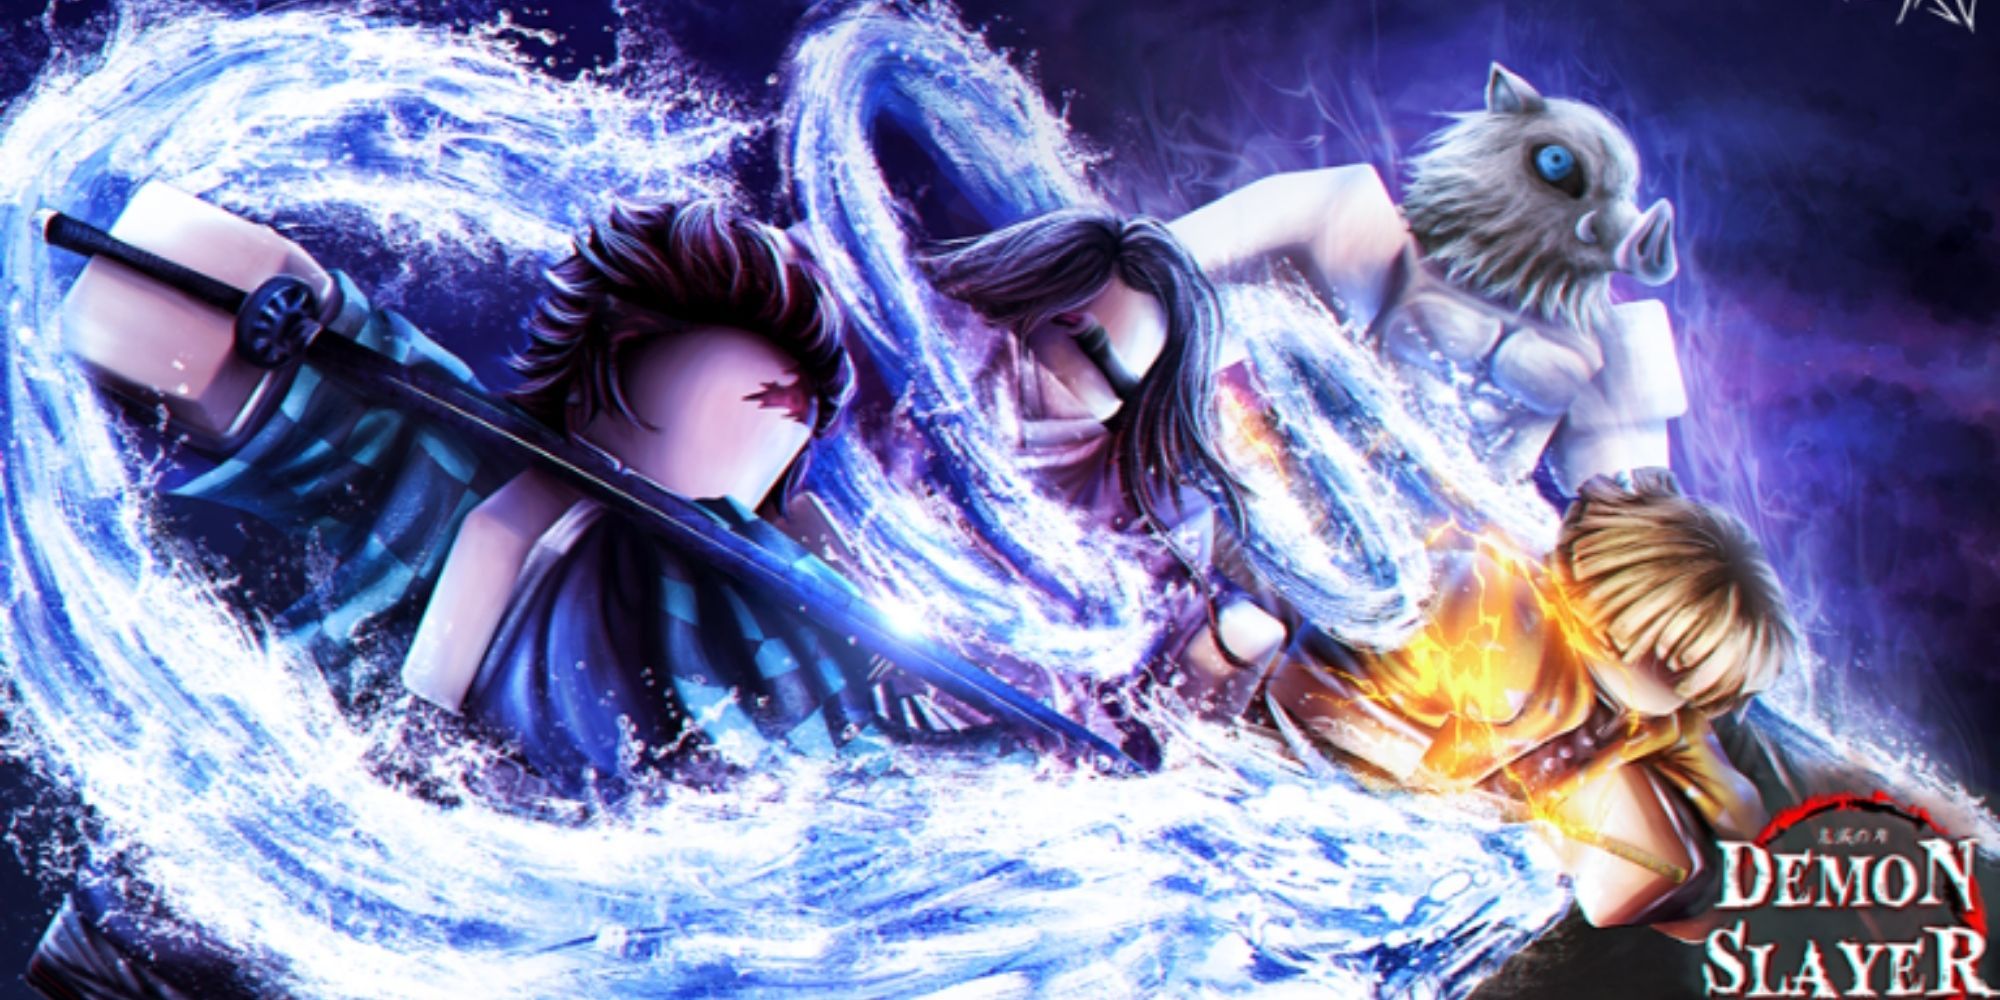 Characters engulfed in a stream of ice with a blue vector background, official image of Roblox game Demon Slayer RPG 2.